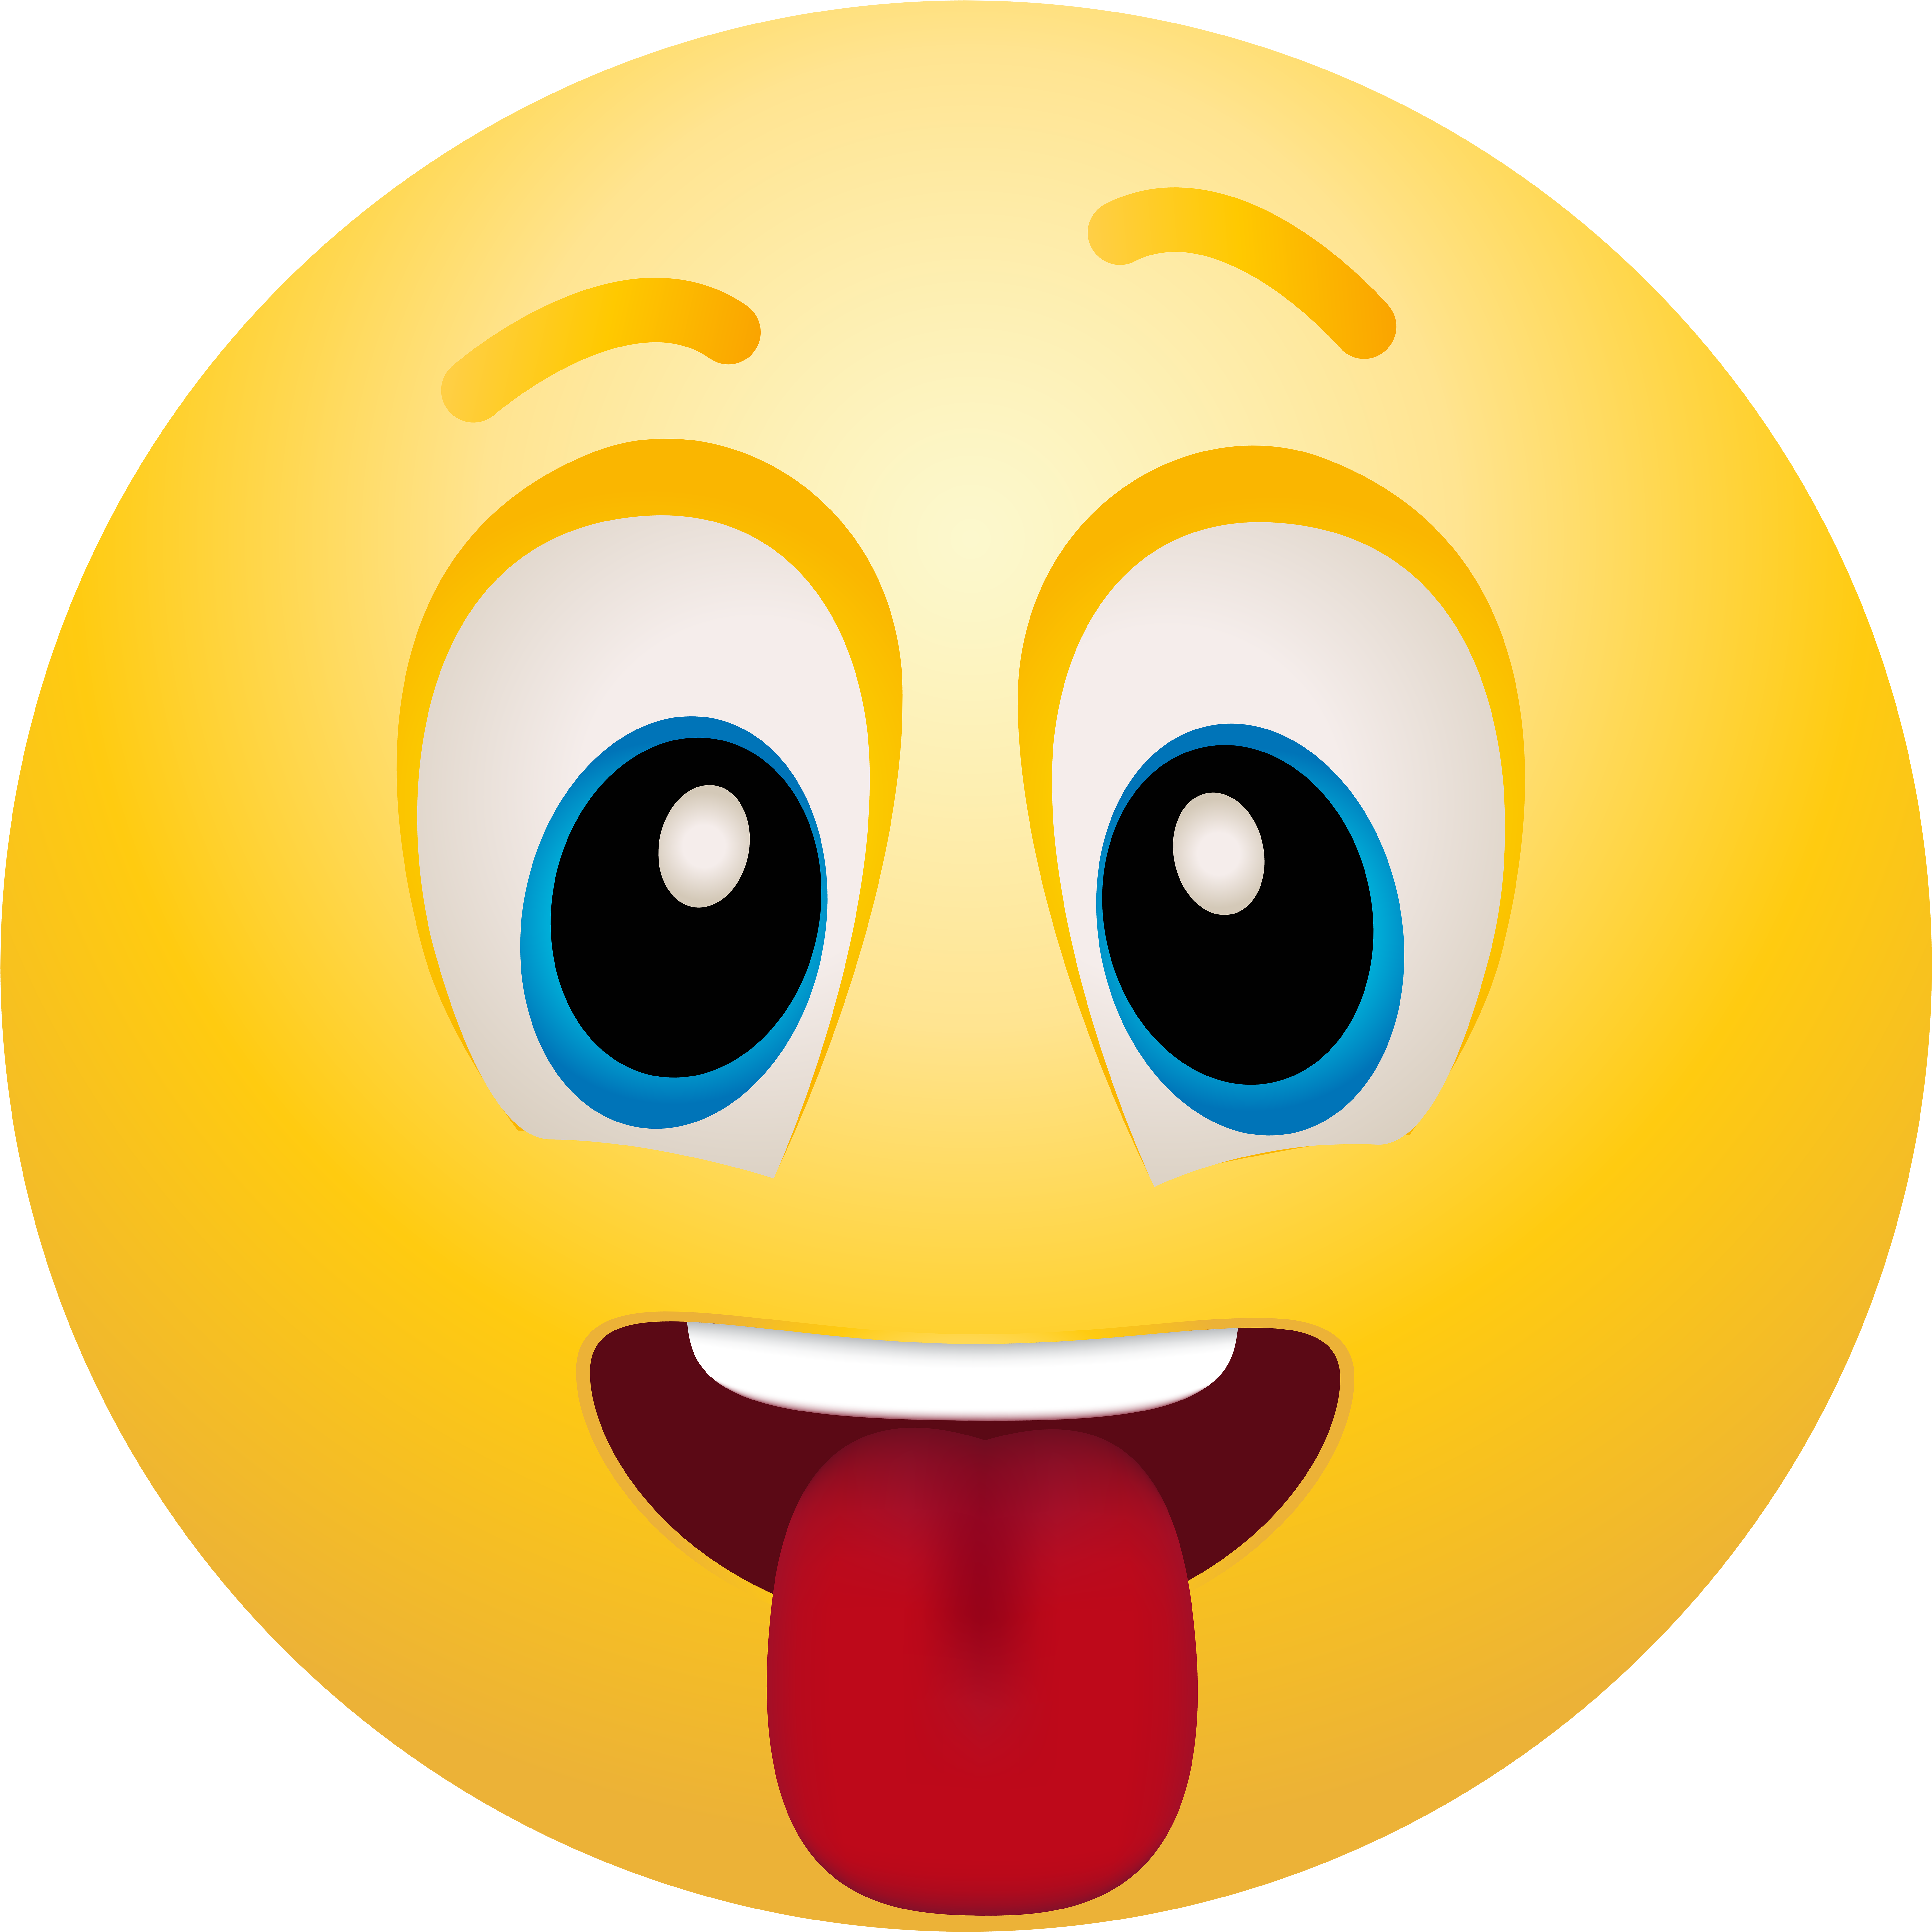 Tongue Out Emoticon Png Clip Art - Tongue Out Emoticon Png Clip Art (8000x8000)